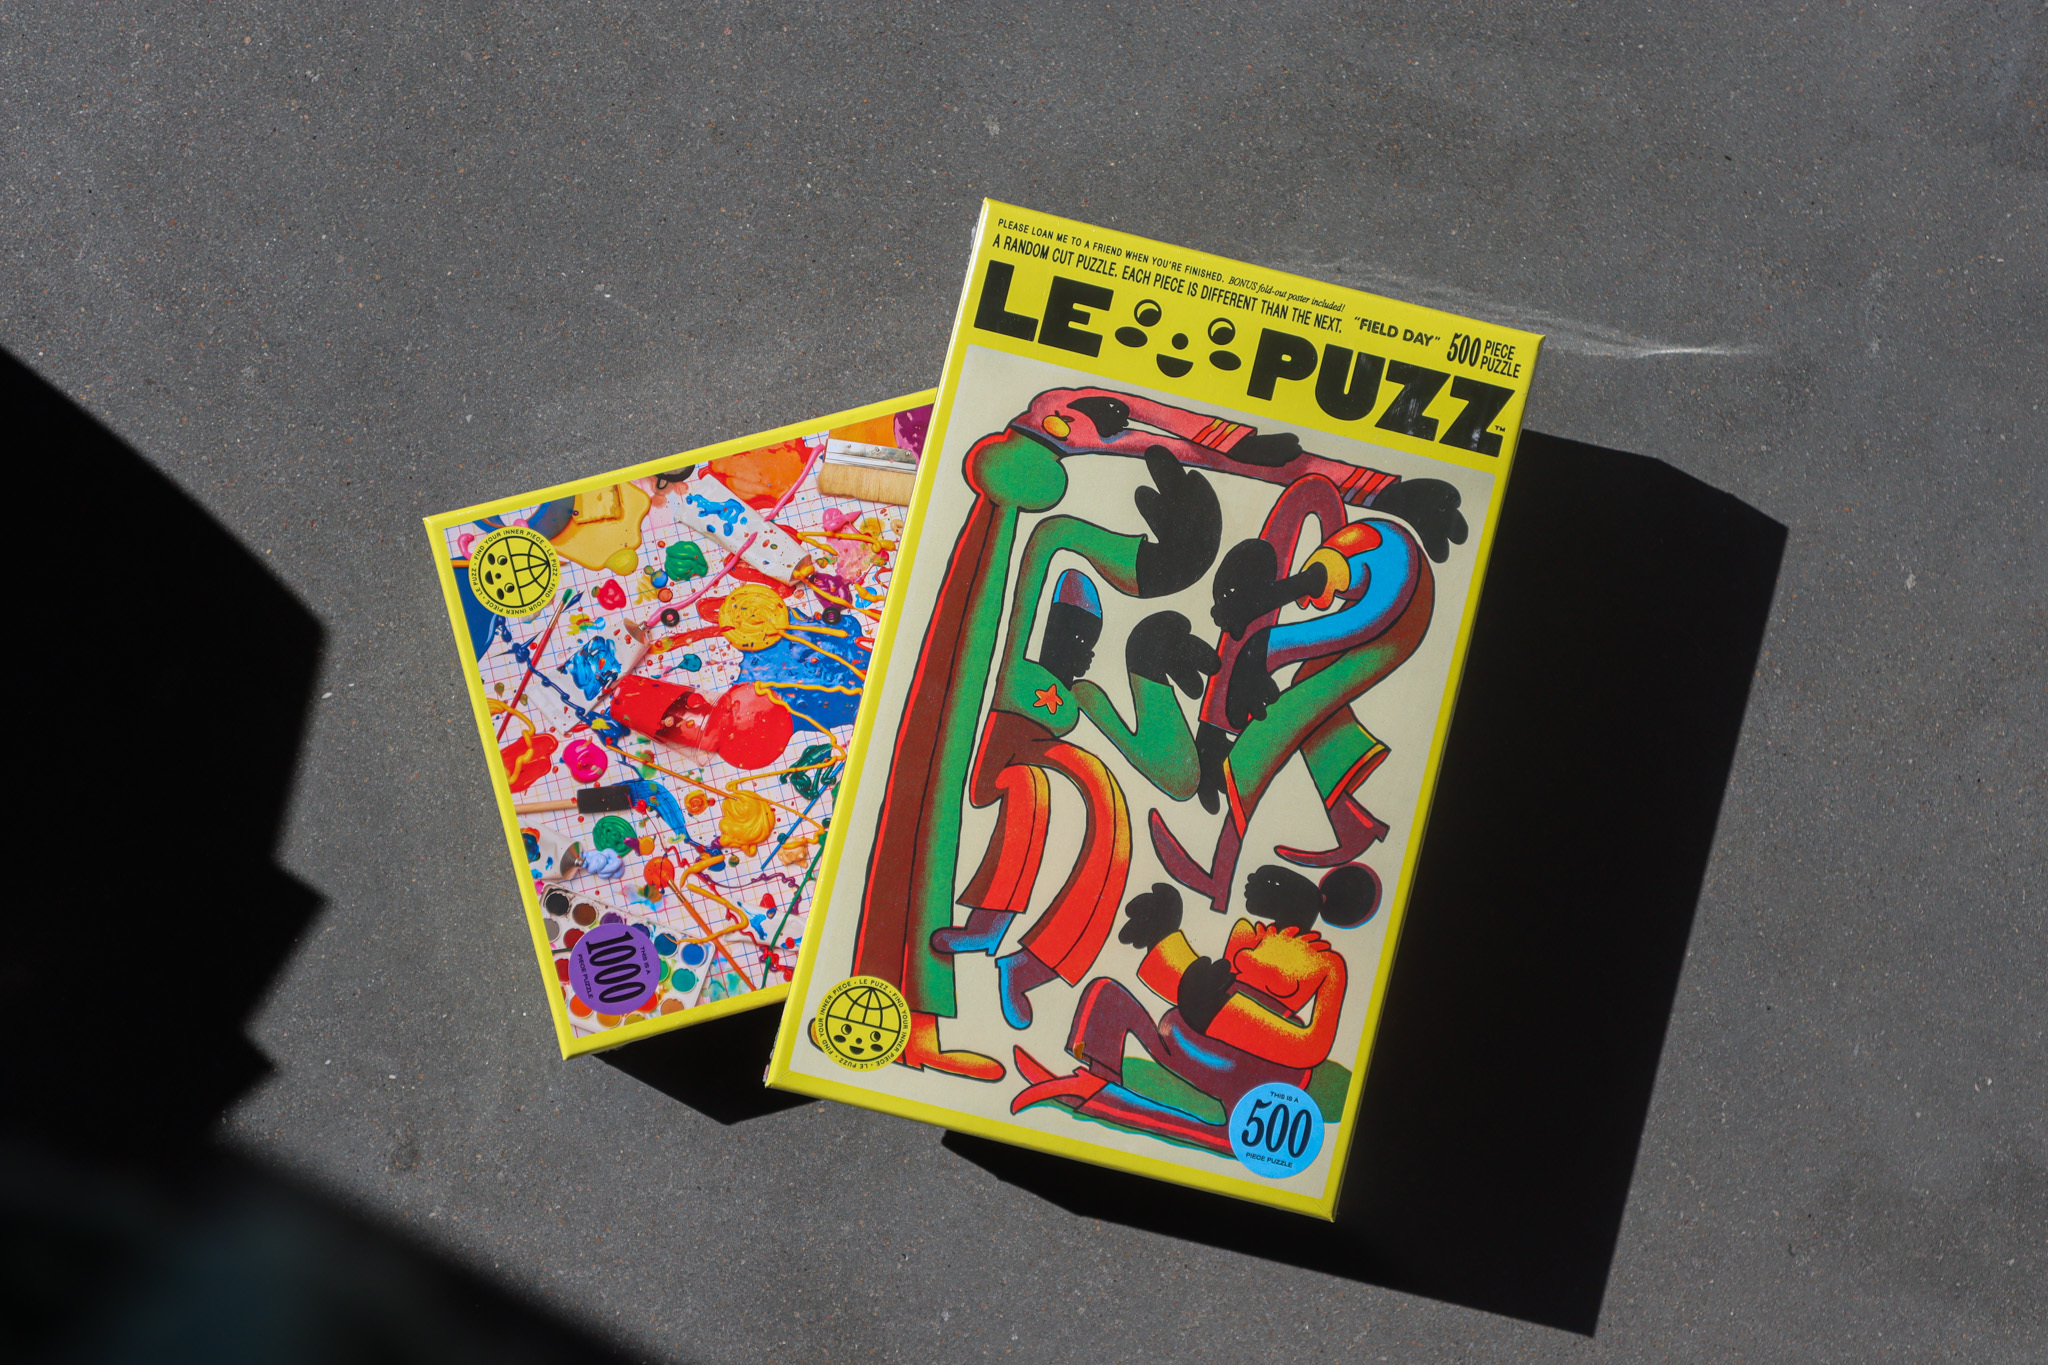 Two puzzle boxes sit stacked on top of each other against a cement surface. They are filled with vibrant colors and abstract shapes, bordered in bright yellow with the words LE PUZZ written in black block text at the top.